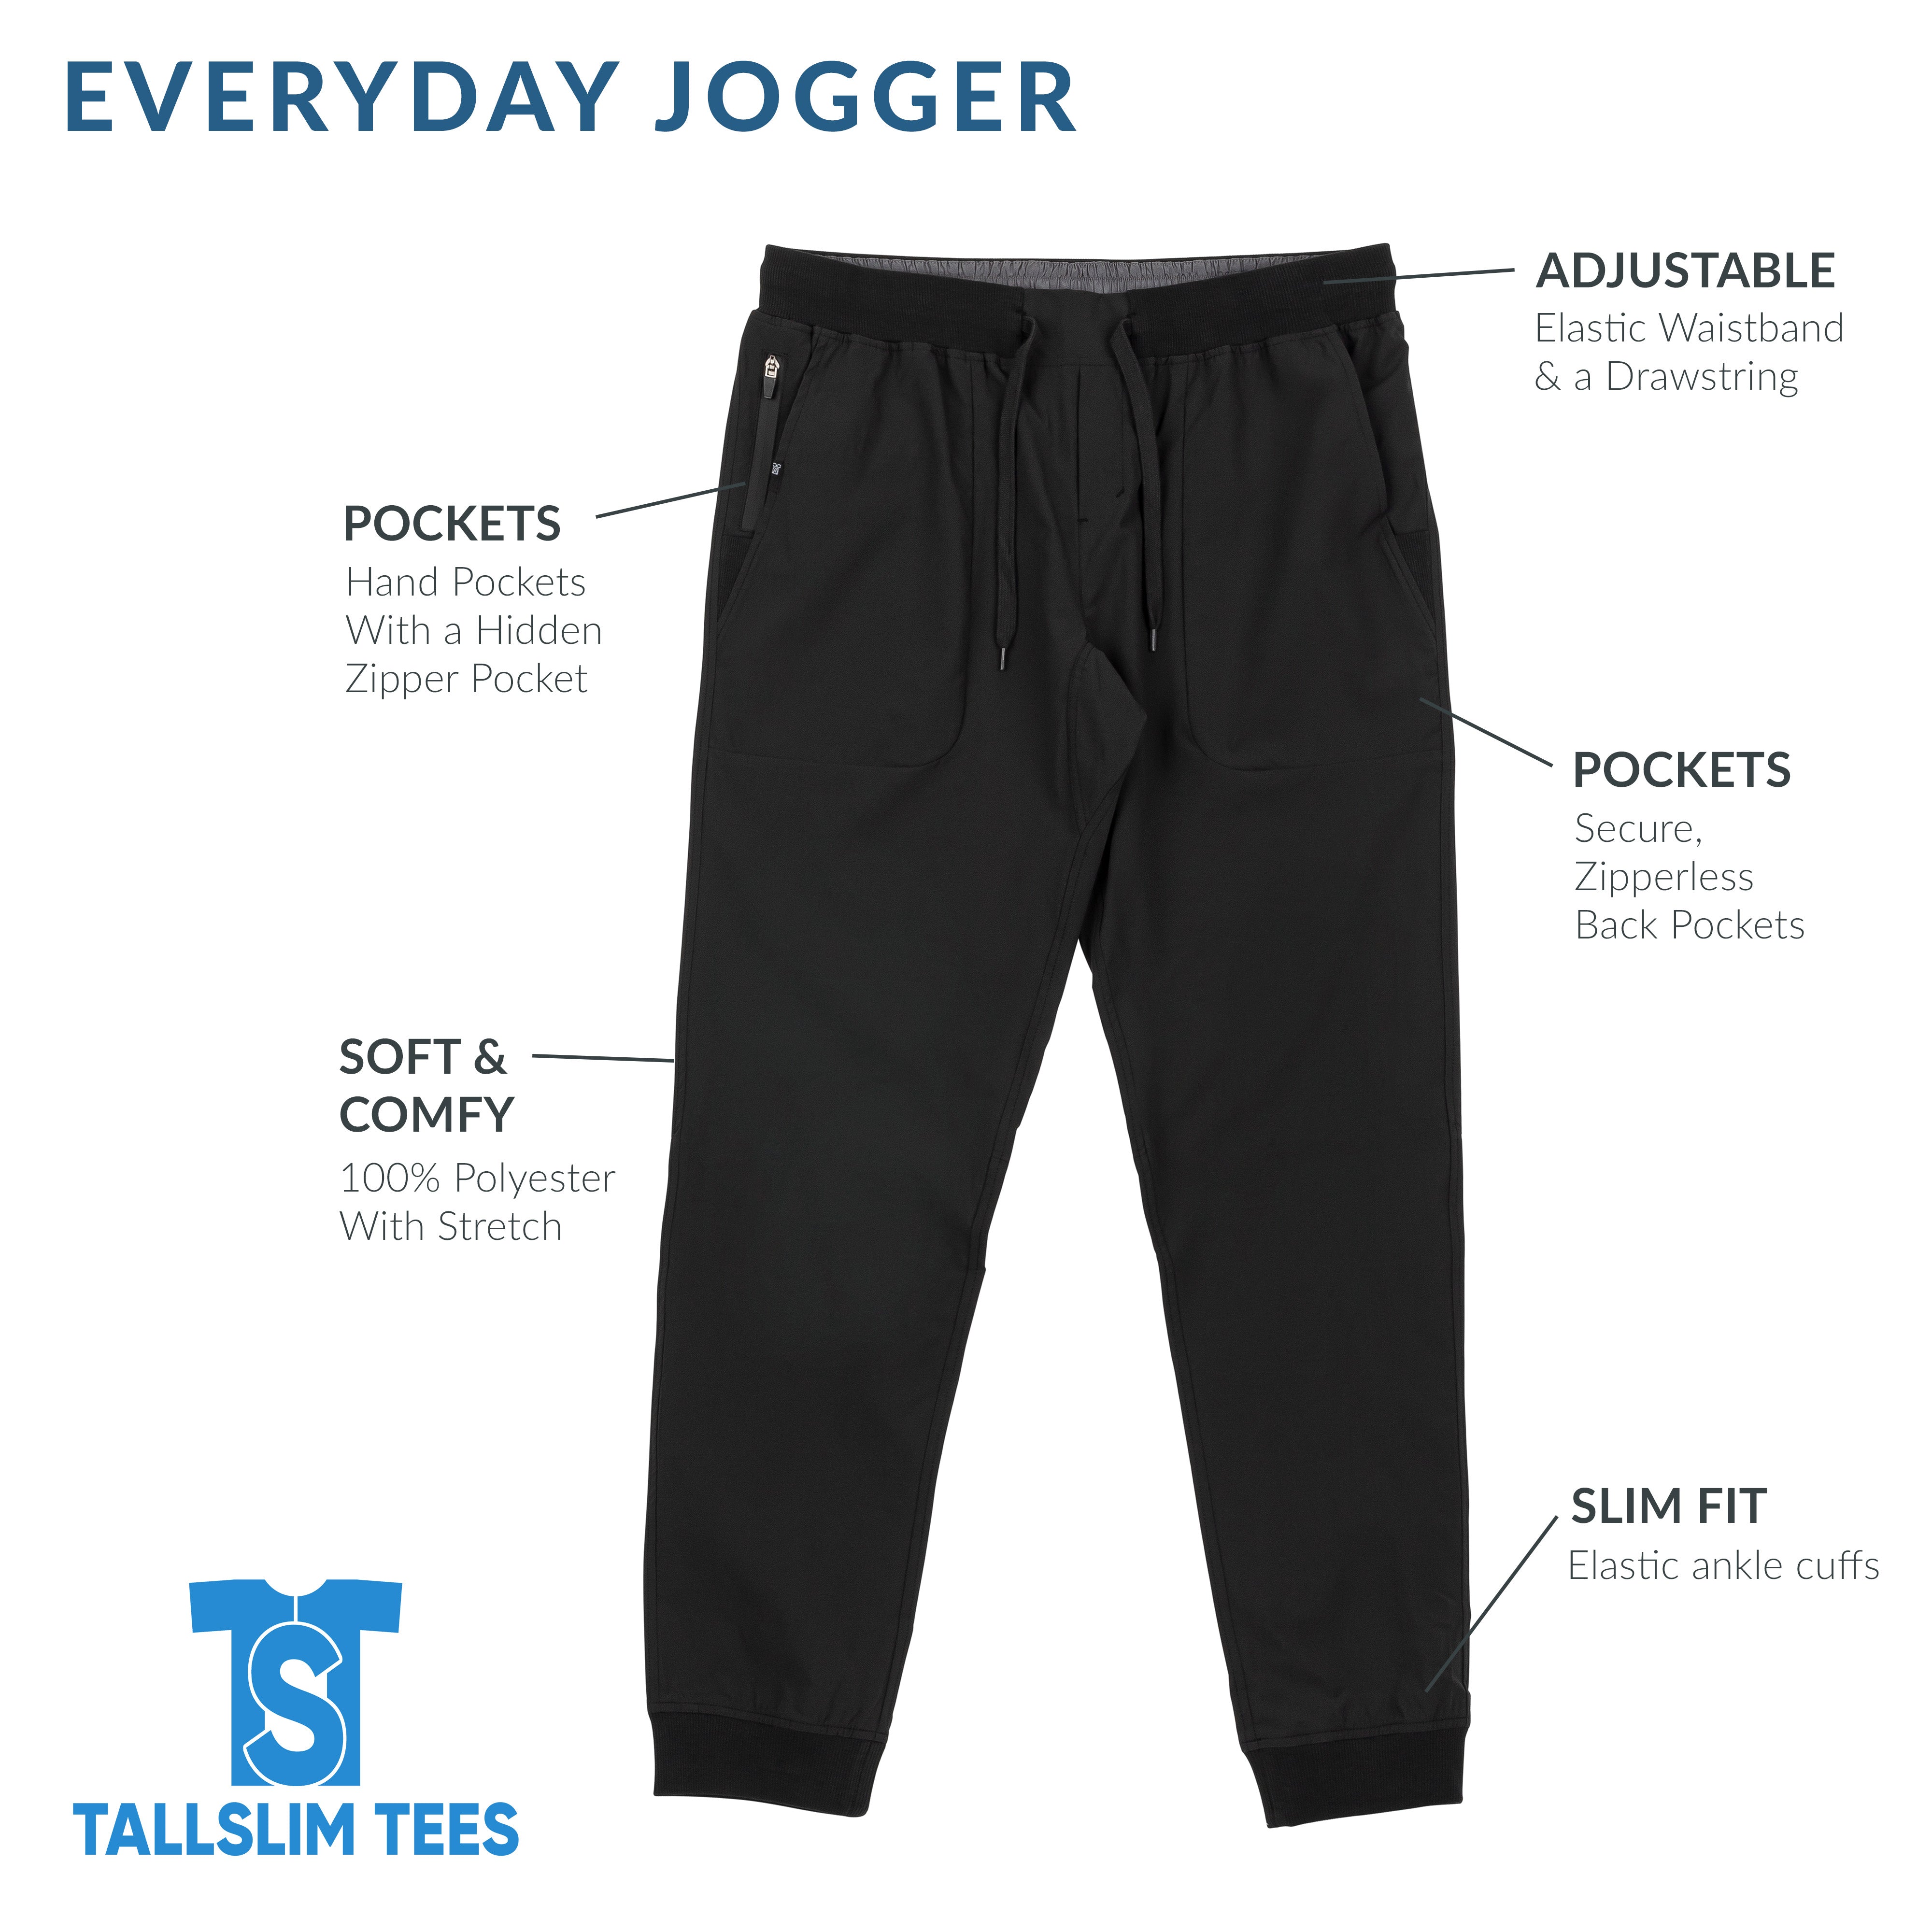 Everyday Jogger Pant